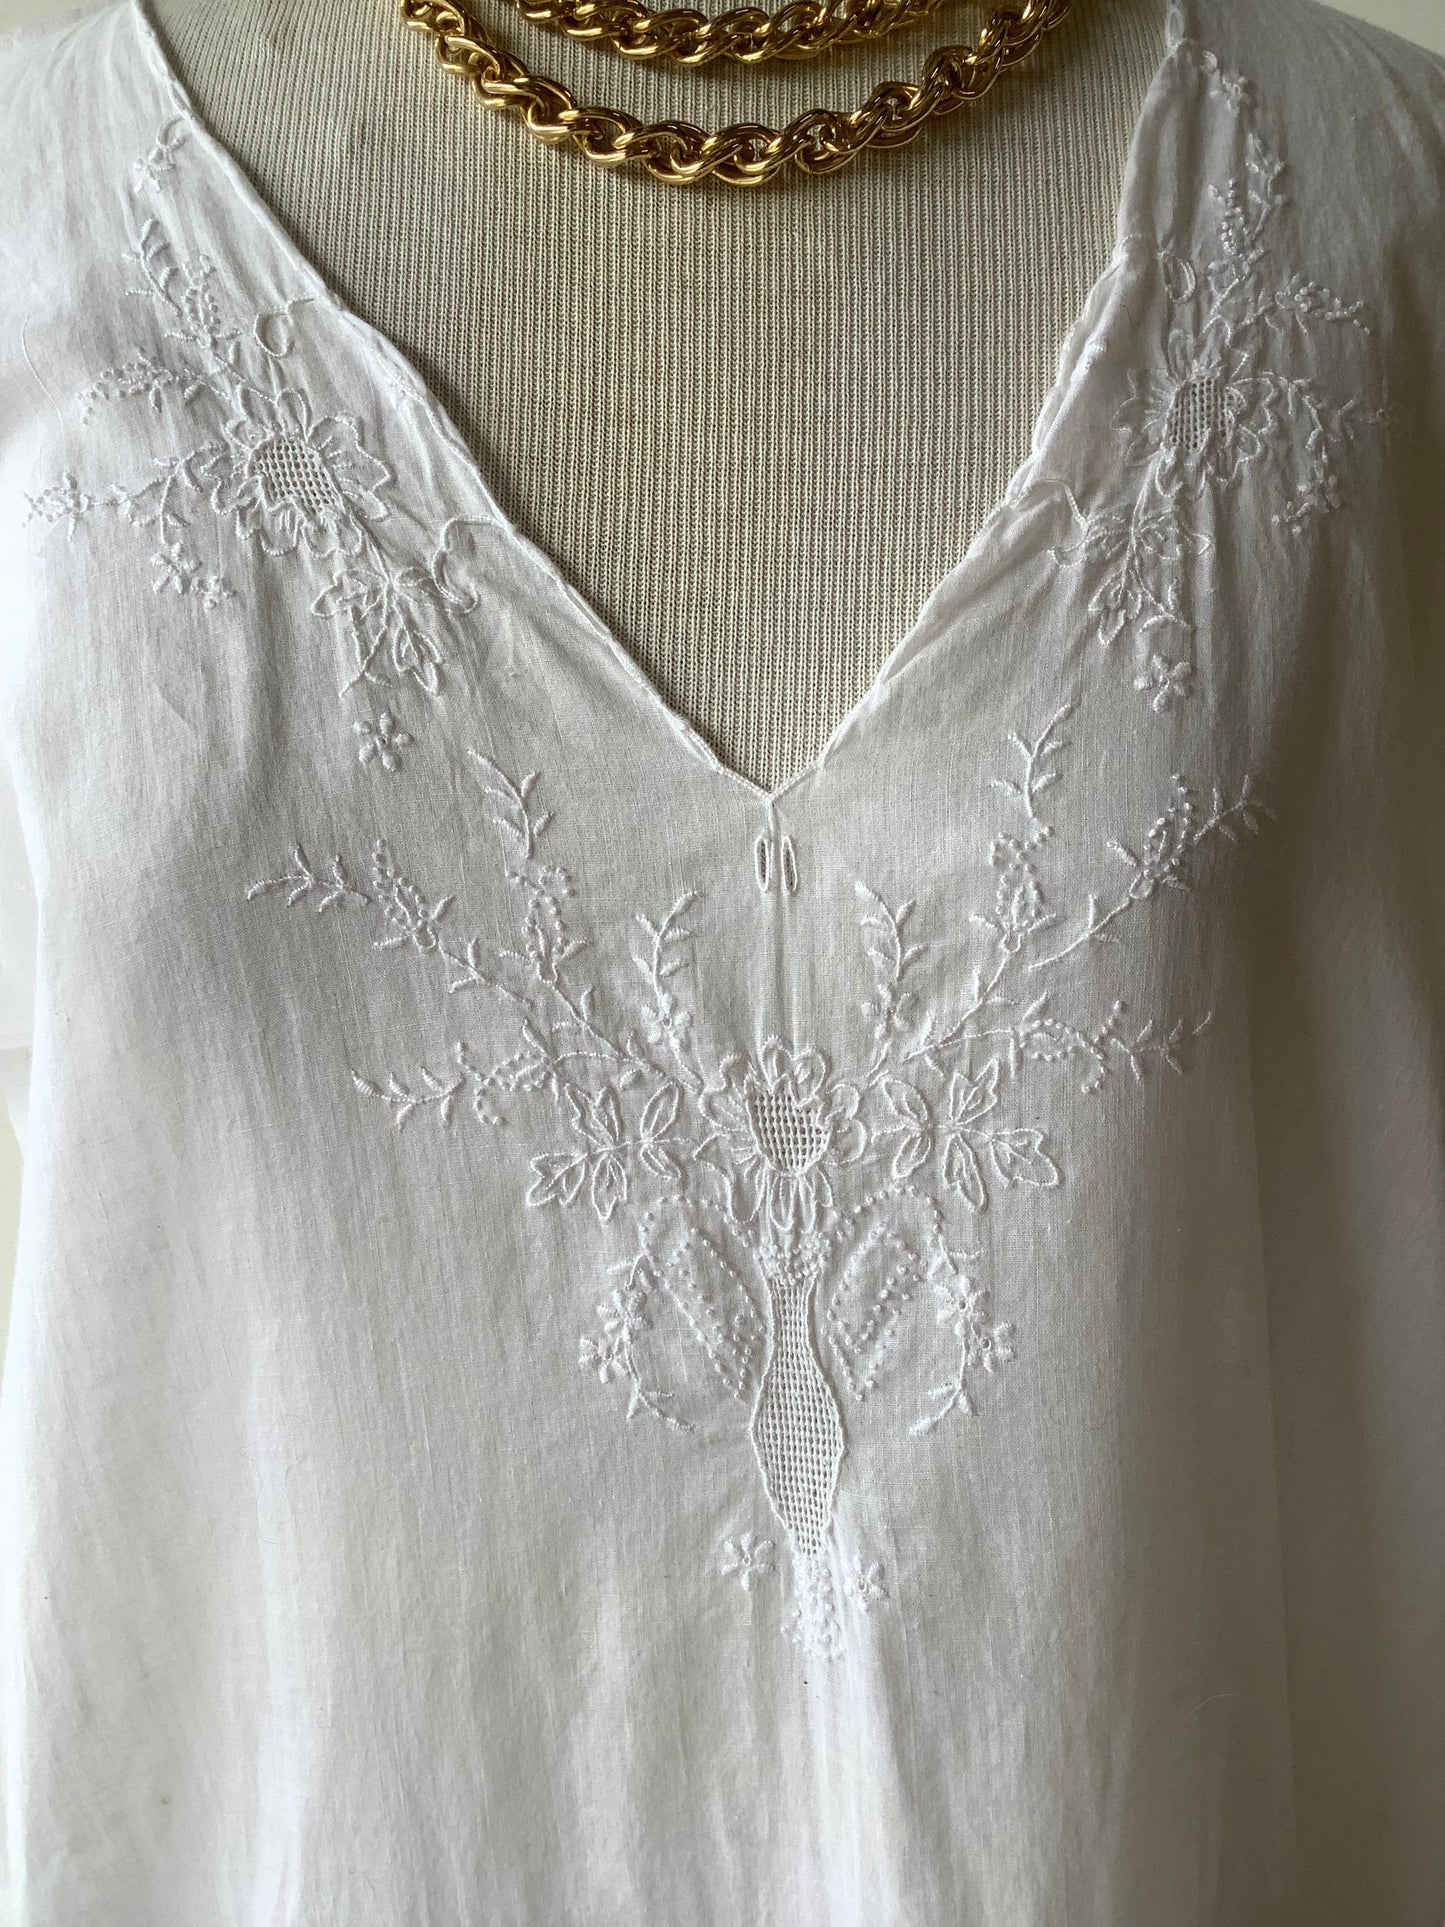 Antique embroidered nightgown